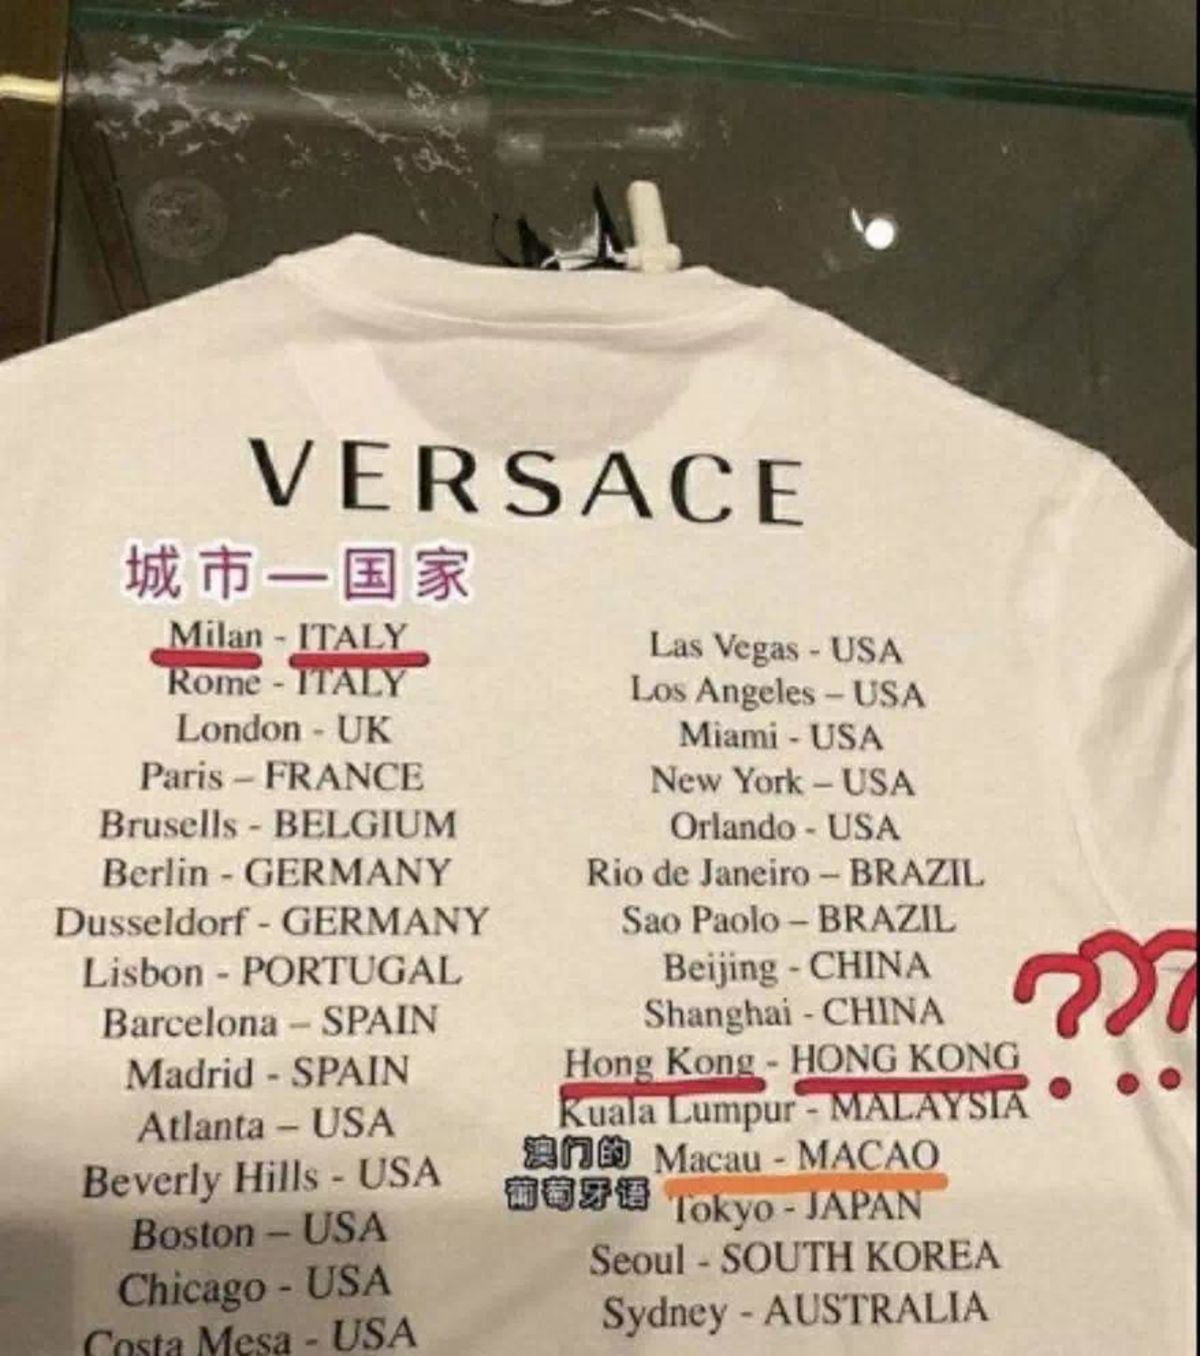 Versace T-shirt controversy: Chinese 